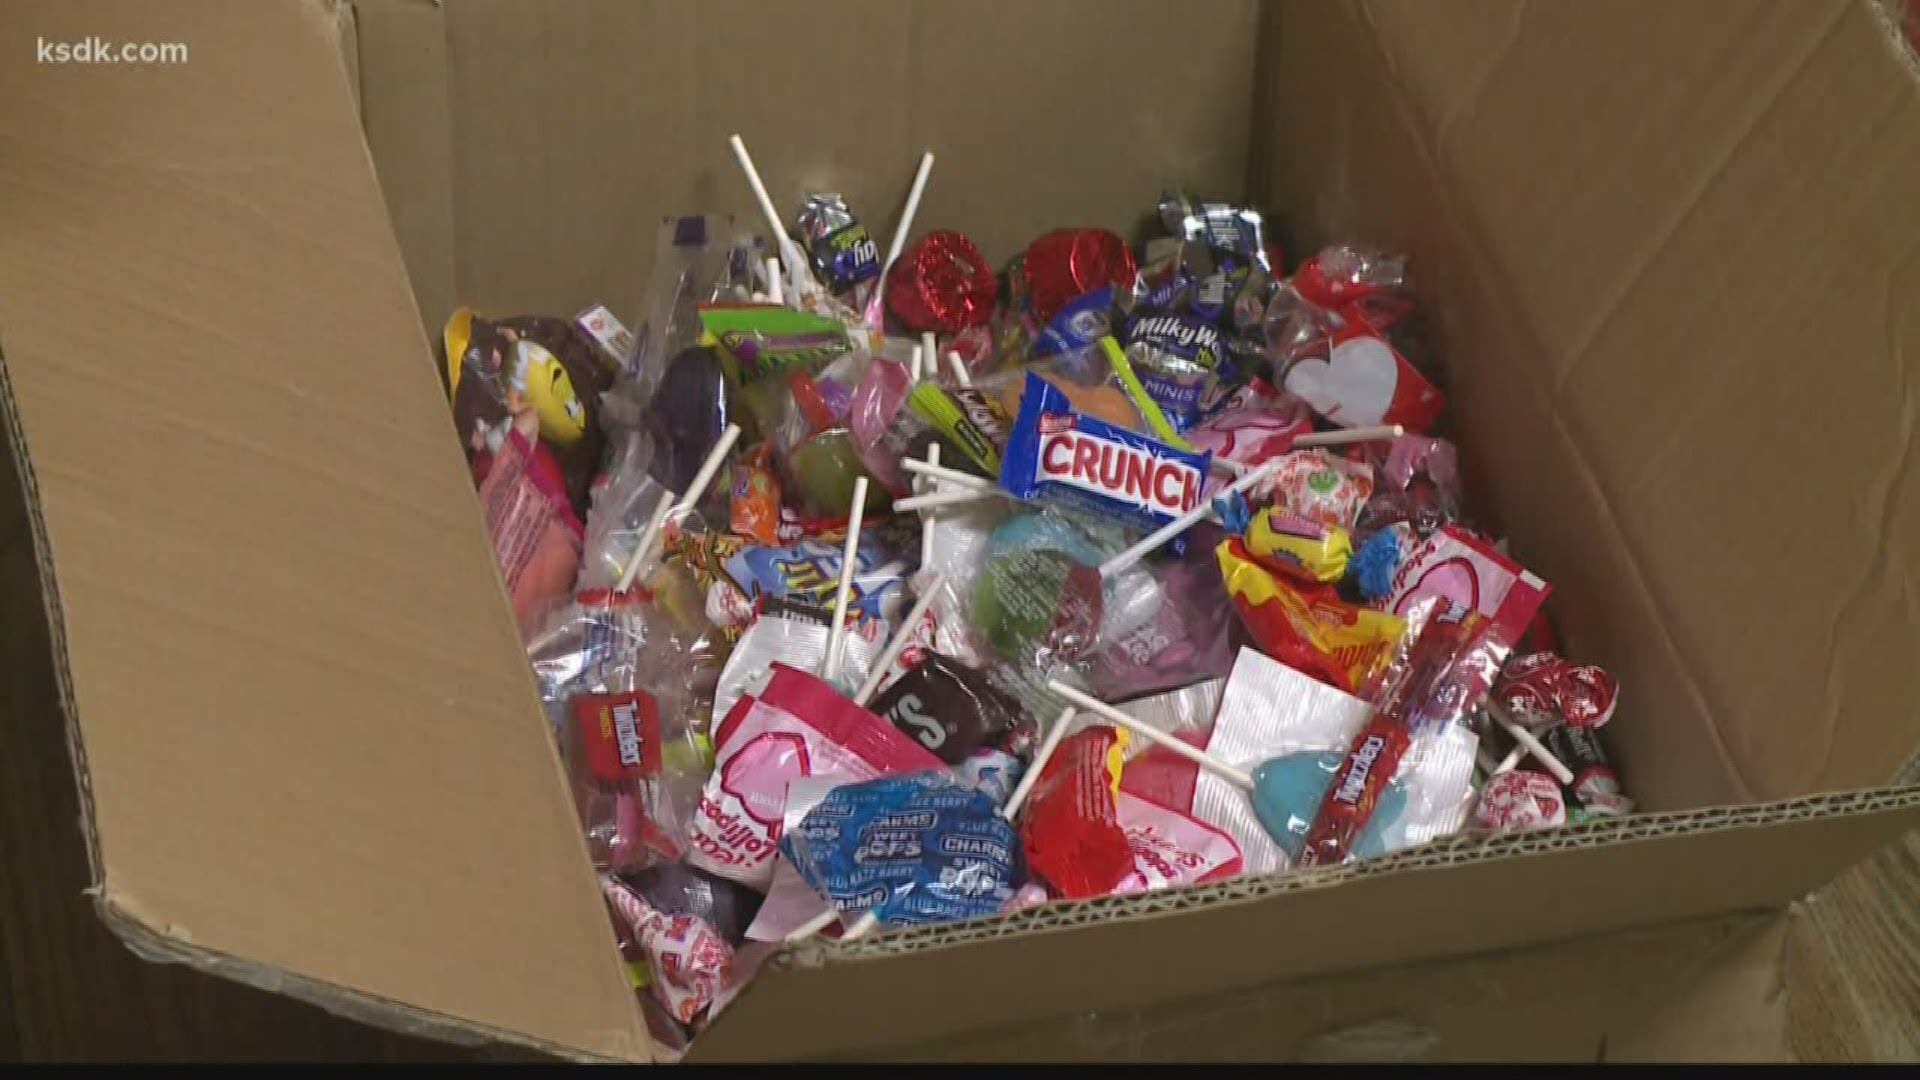 The Lodge Des Peres is holding a Halloween Candy Exchange.